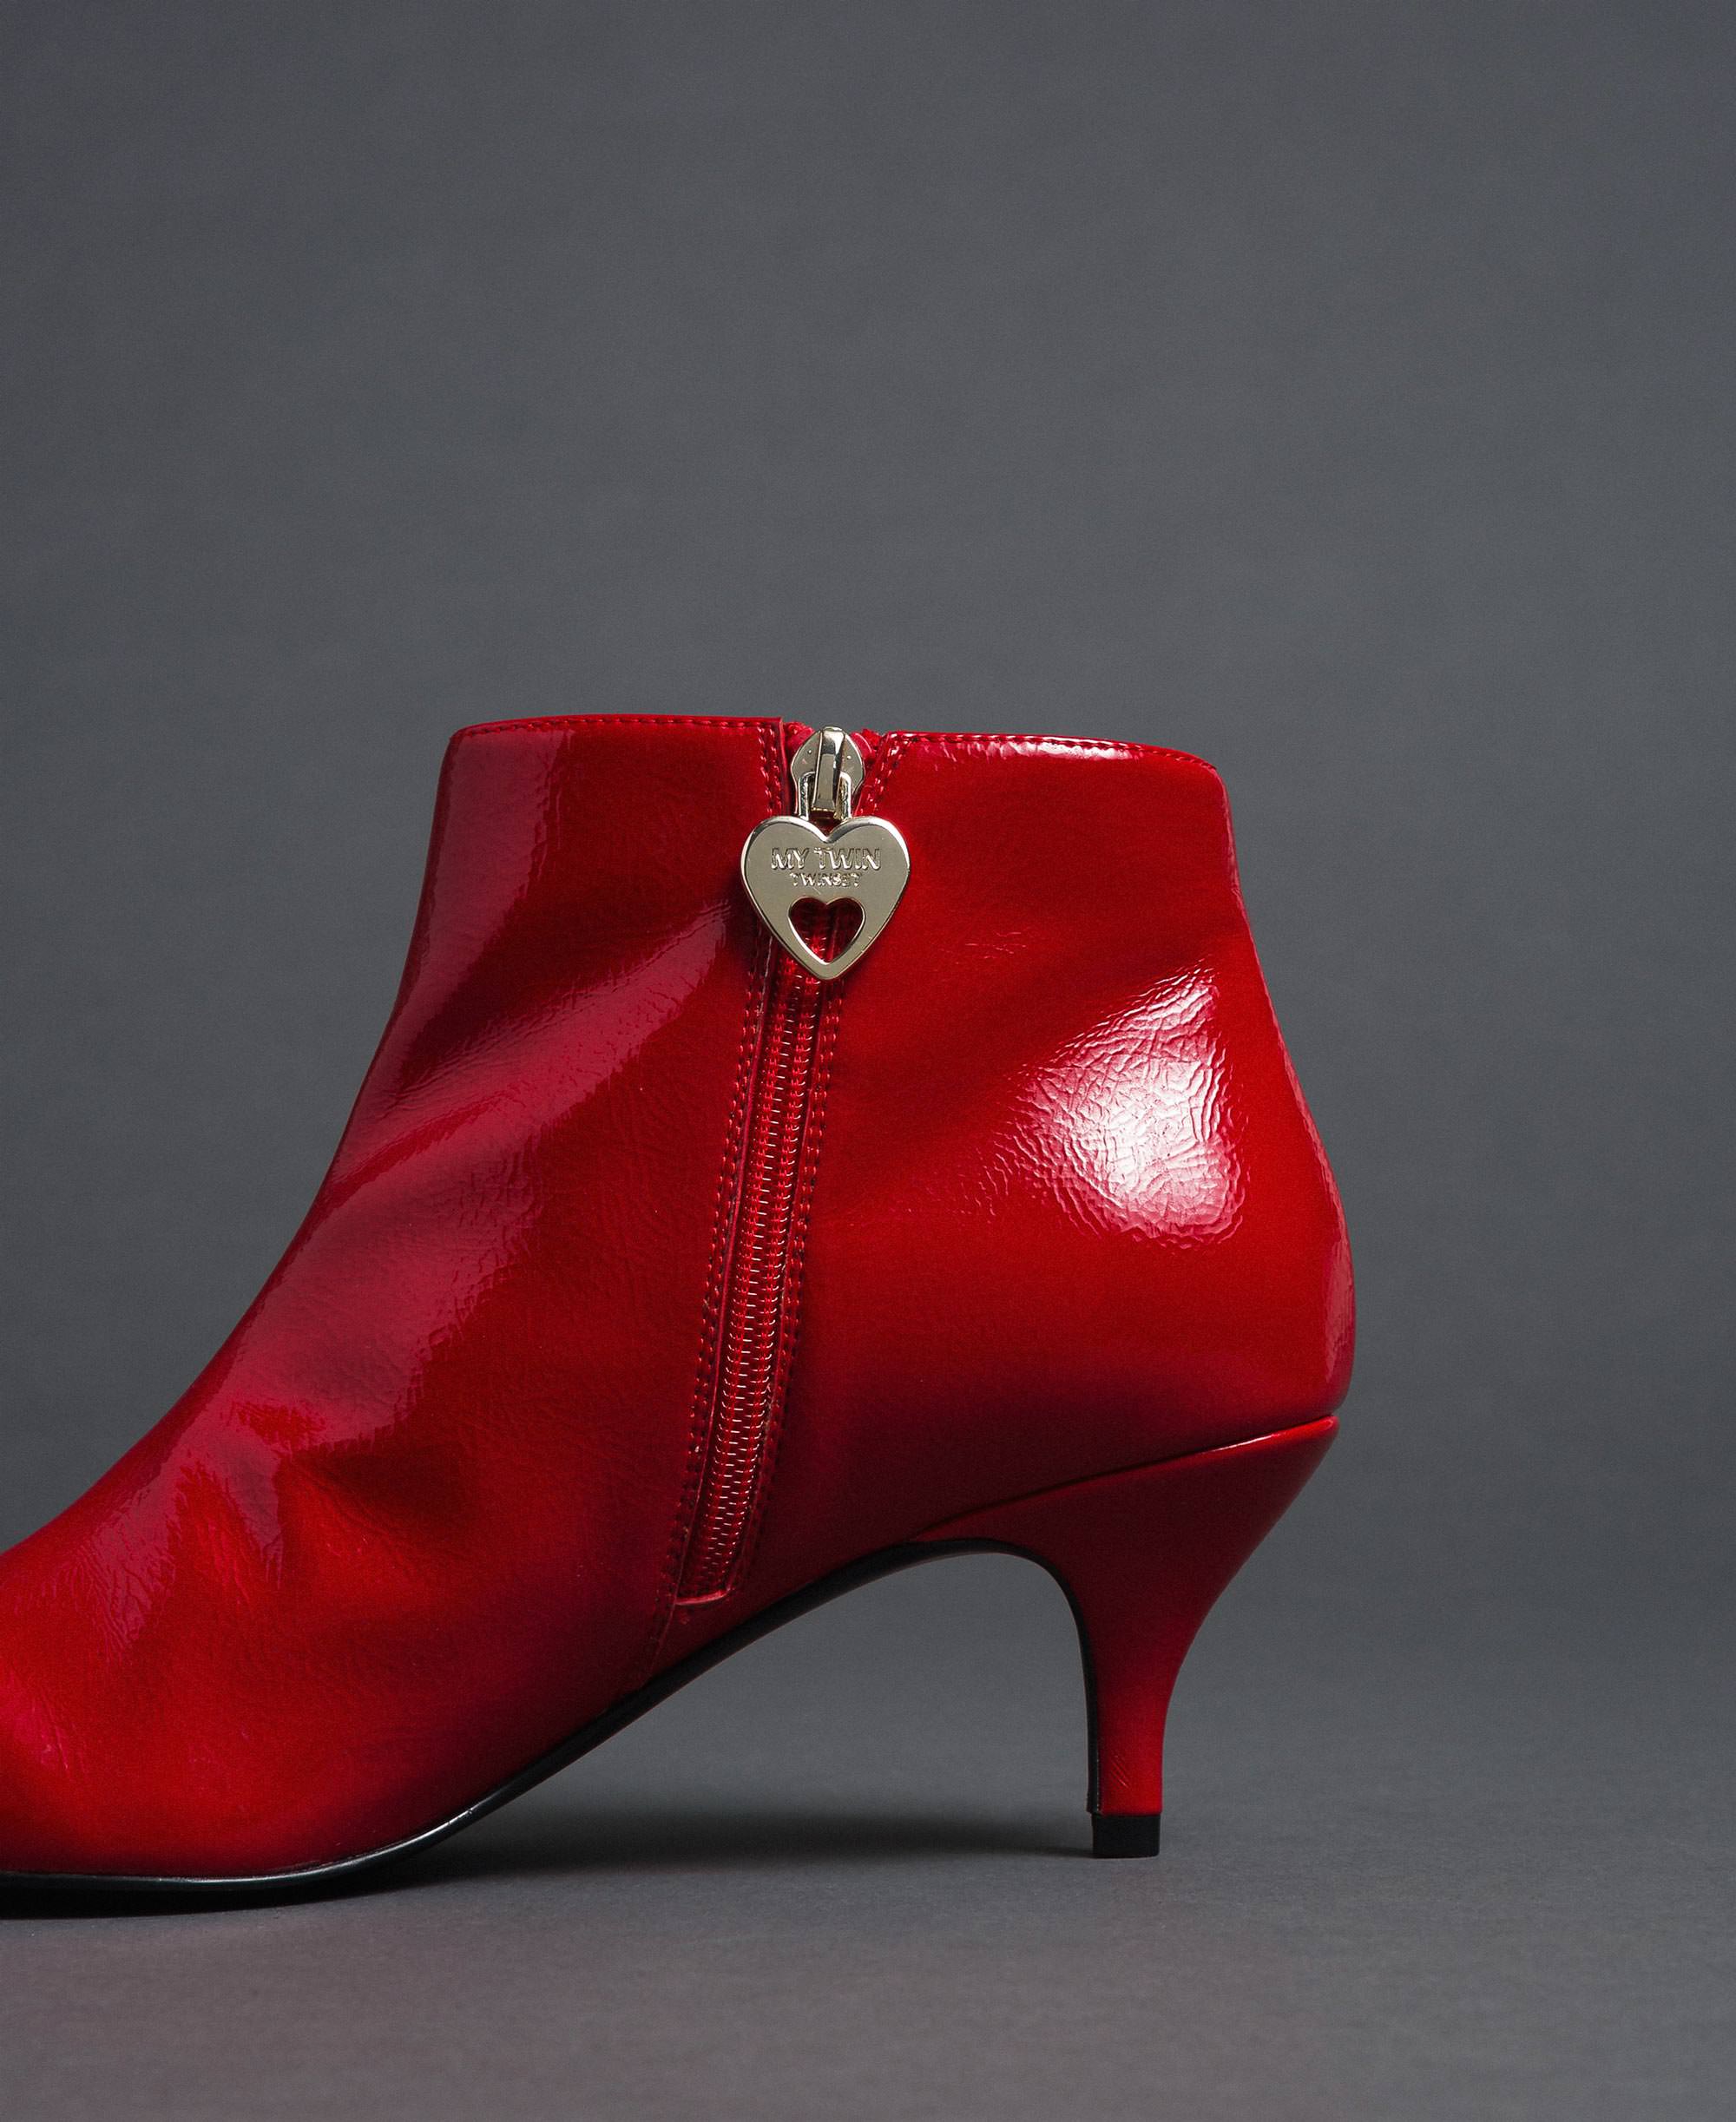 red leather kitten heel boots